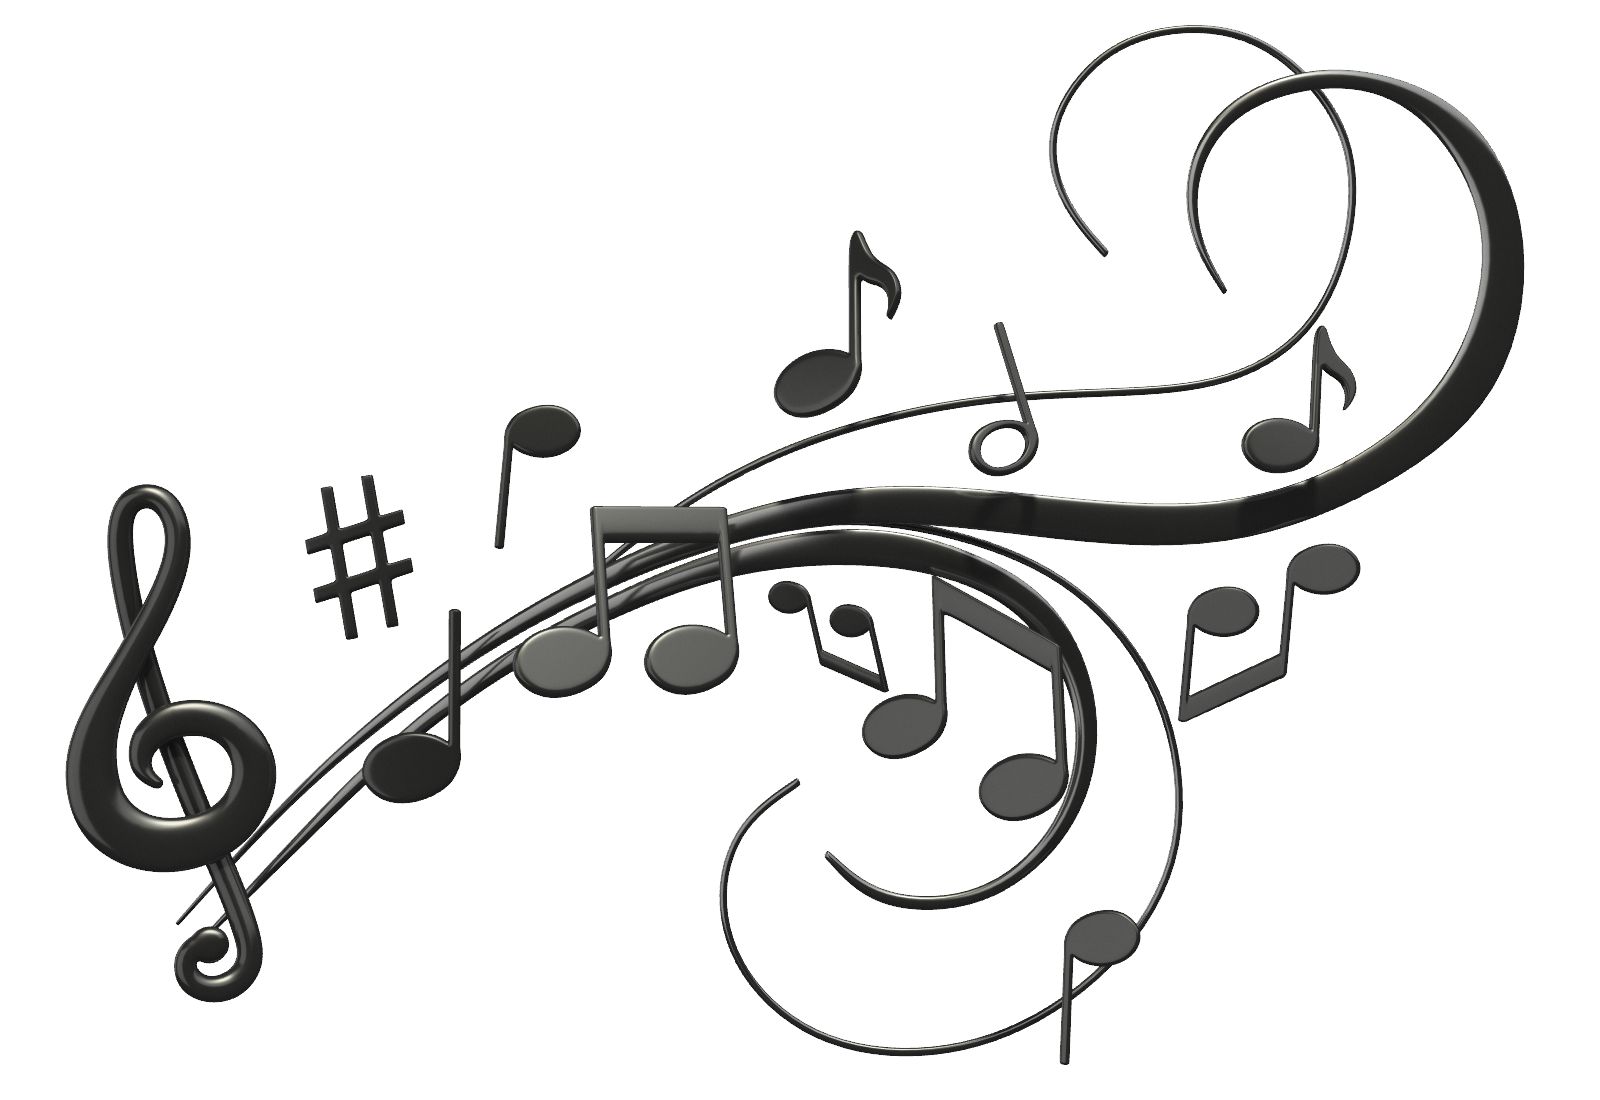 Musical Notes Png   Clipart Panda   Free Clipart Images